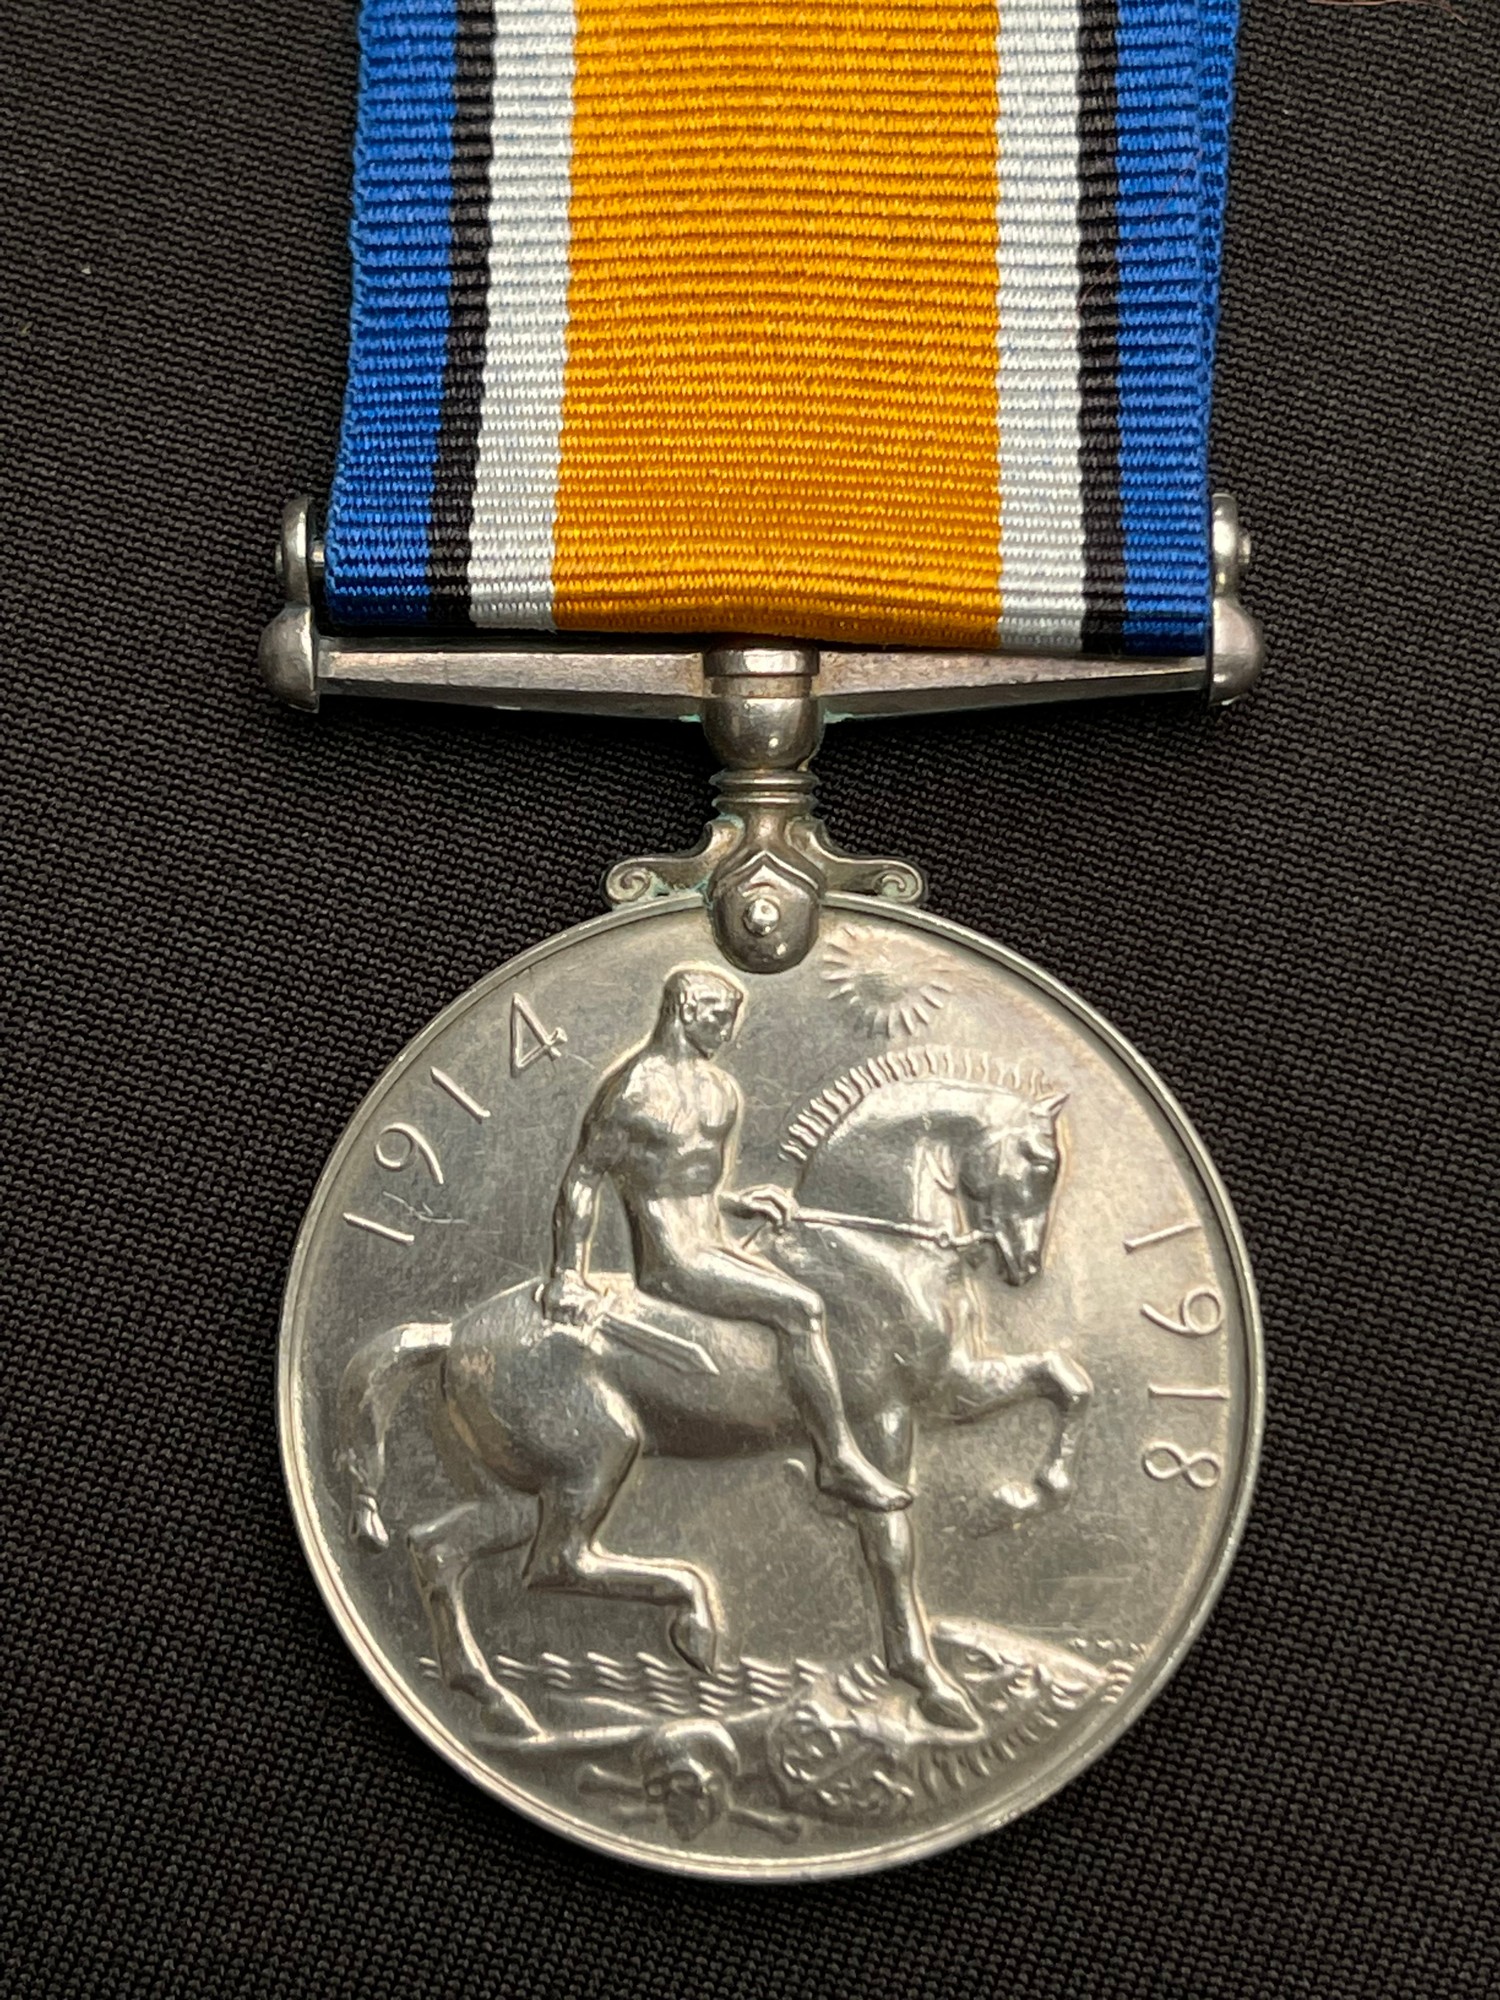 WW1 British War Medal to R4-124949 ACpl. W Dawson, ASC. Complete with ribbon and research. - Image 3 of 4